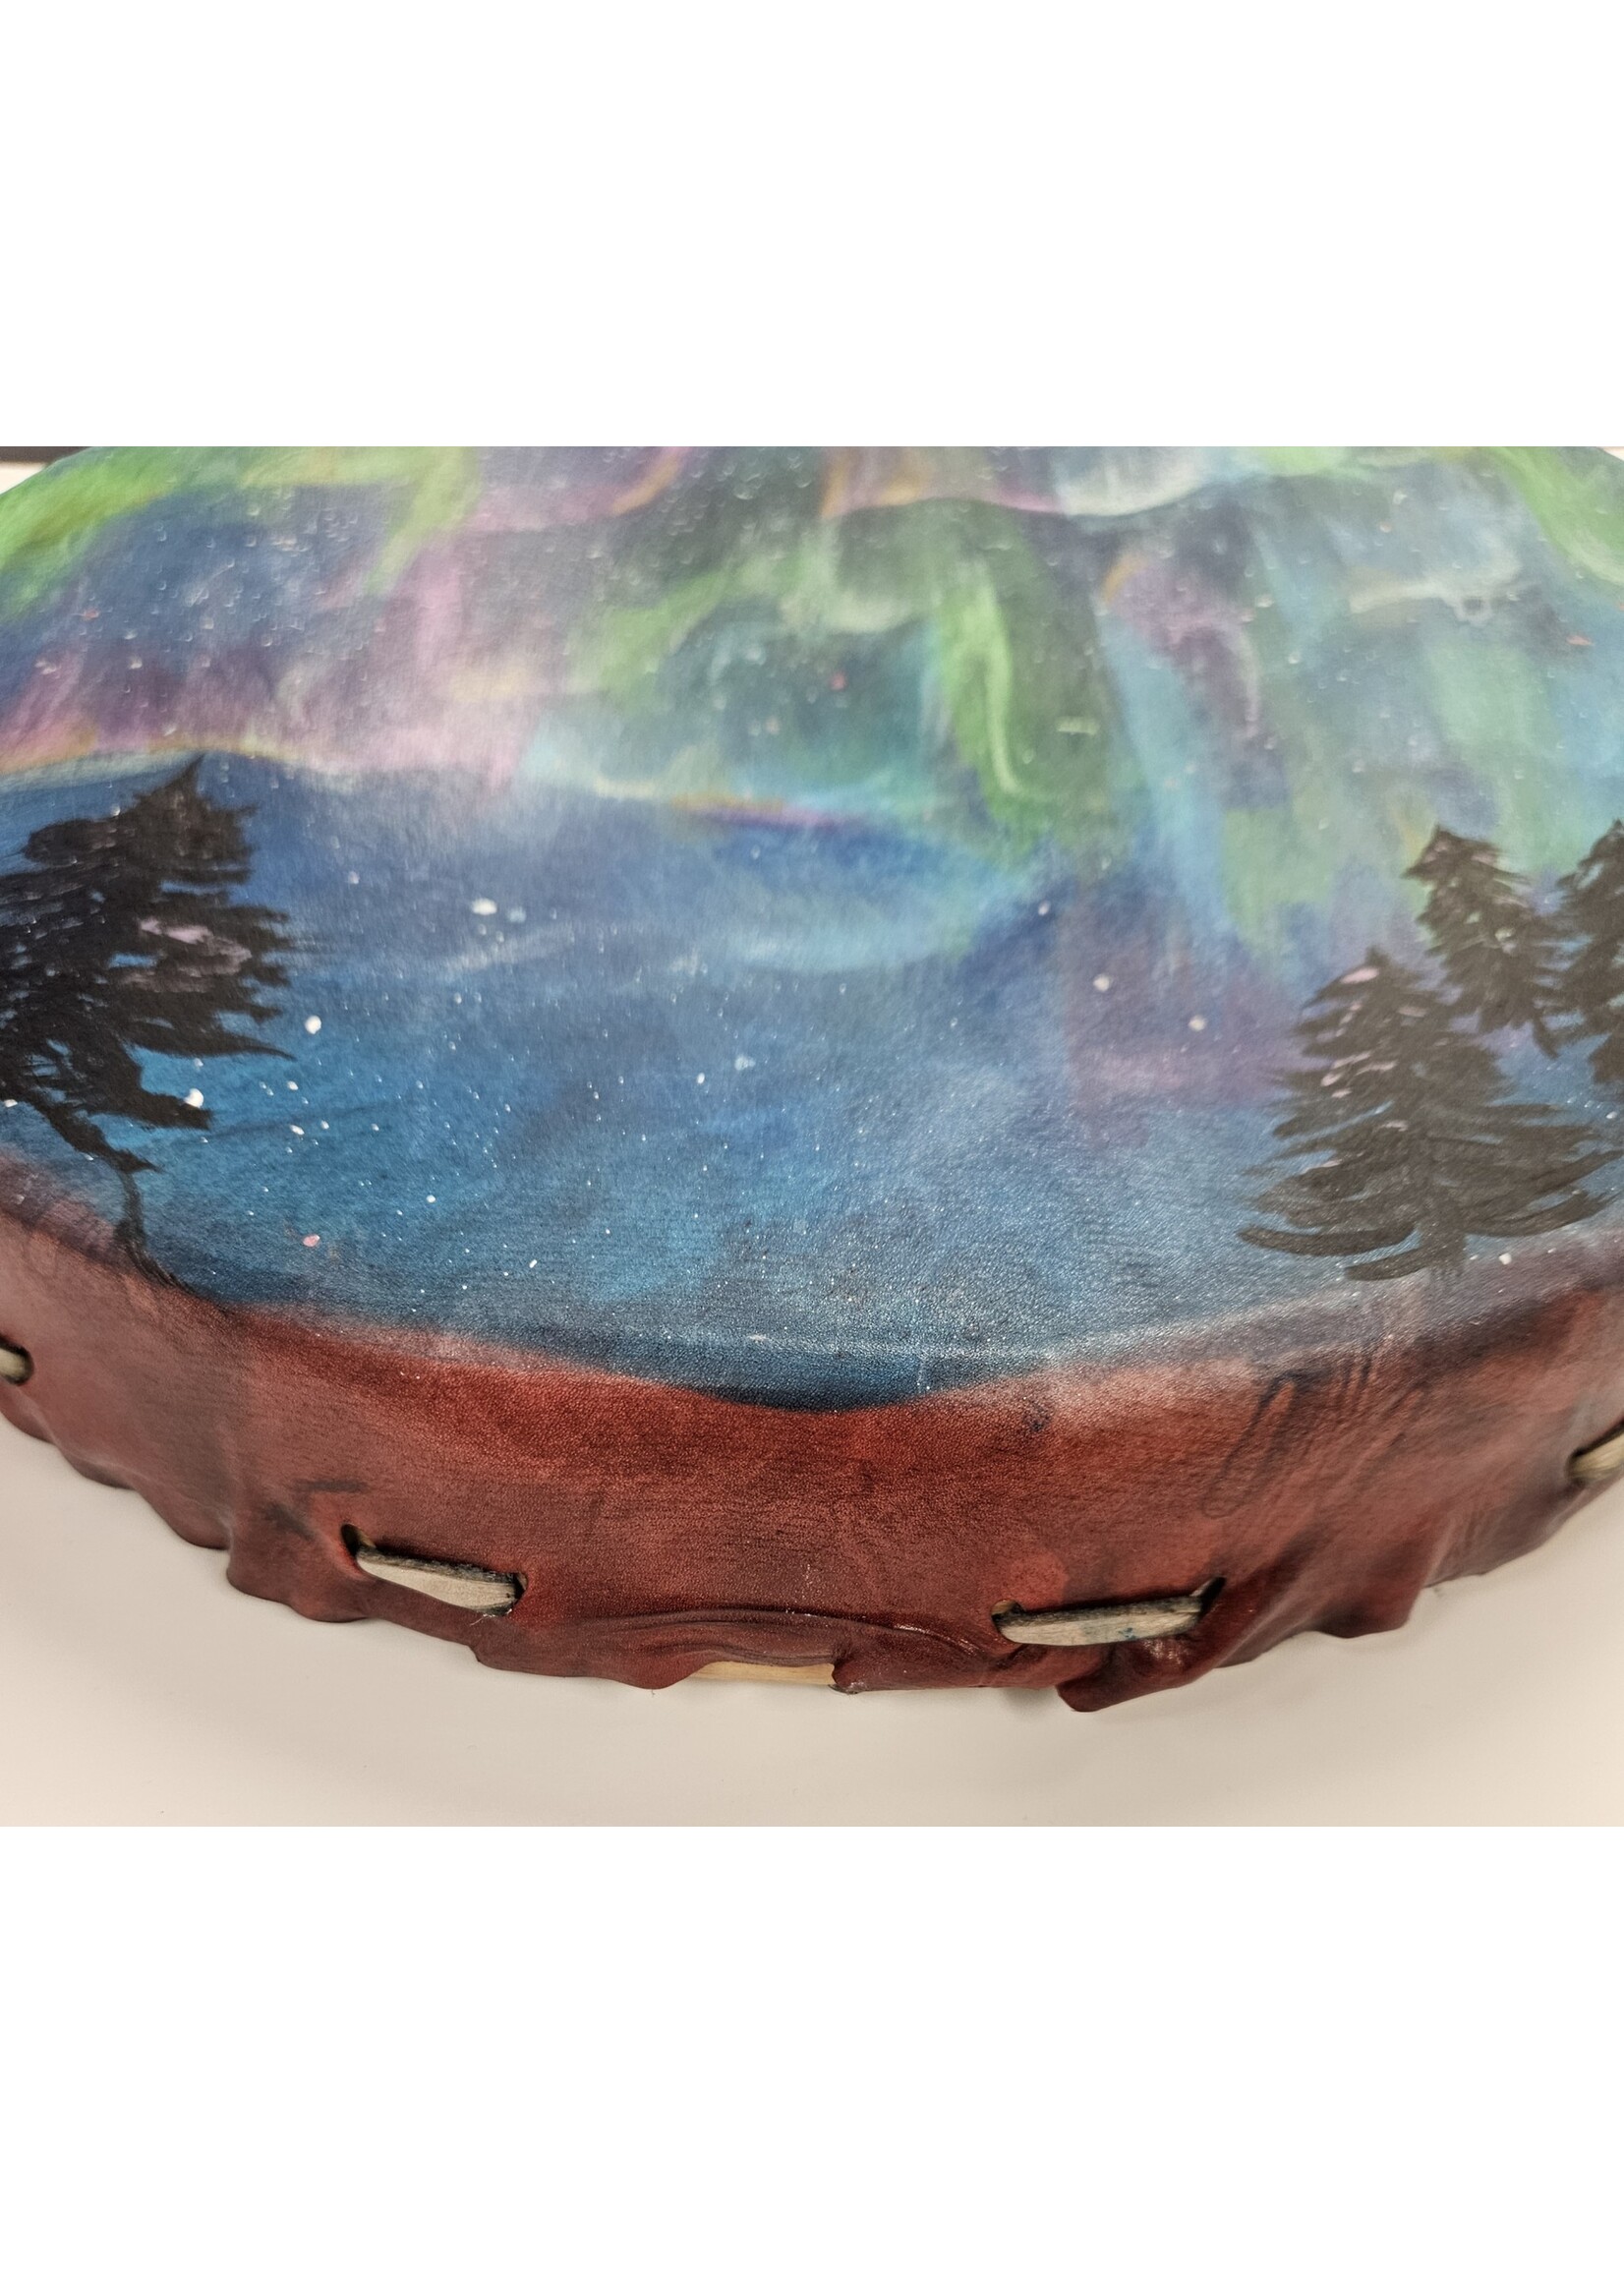 Heartbeat of Mother Earth 14 inch Drum